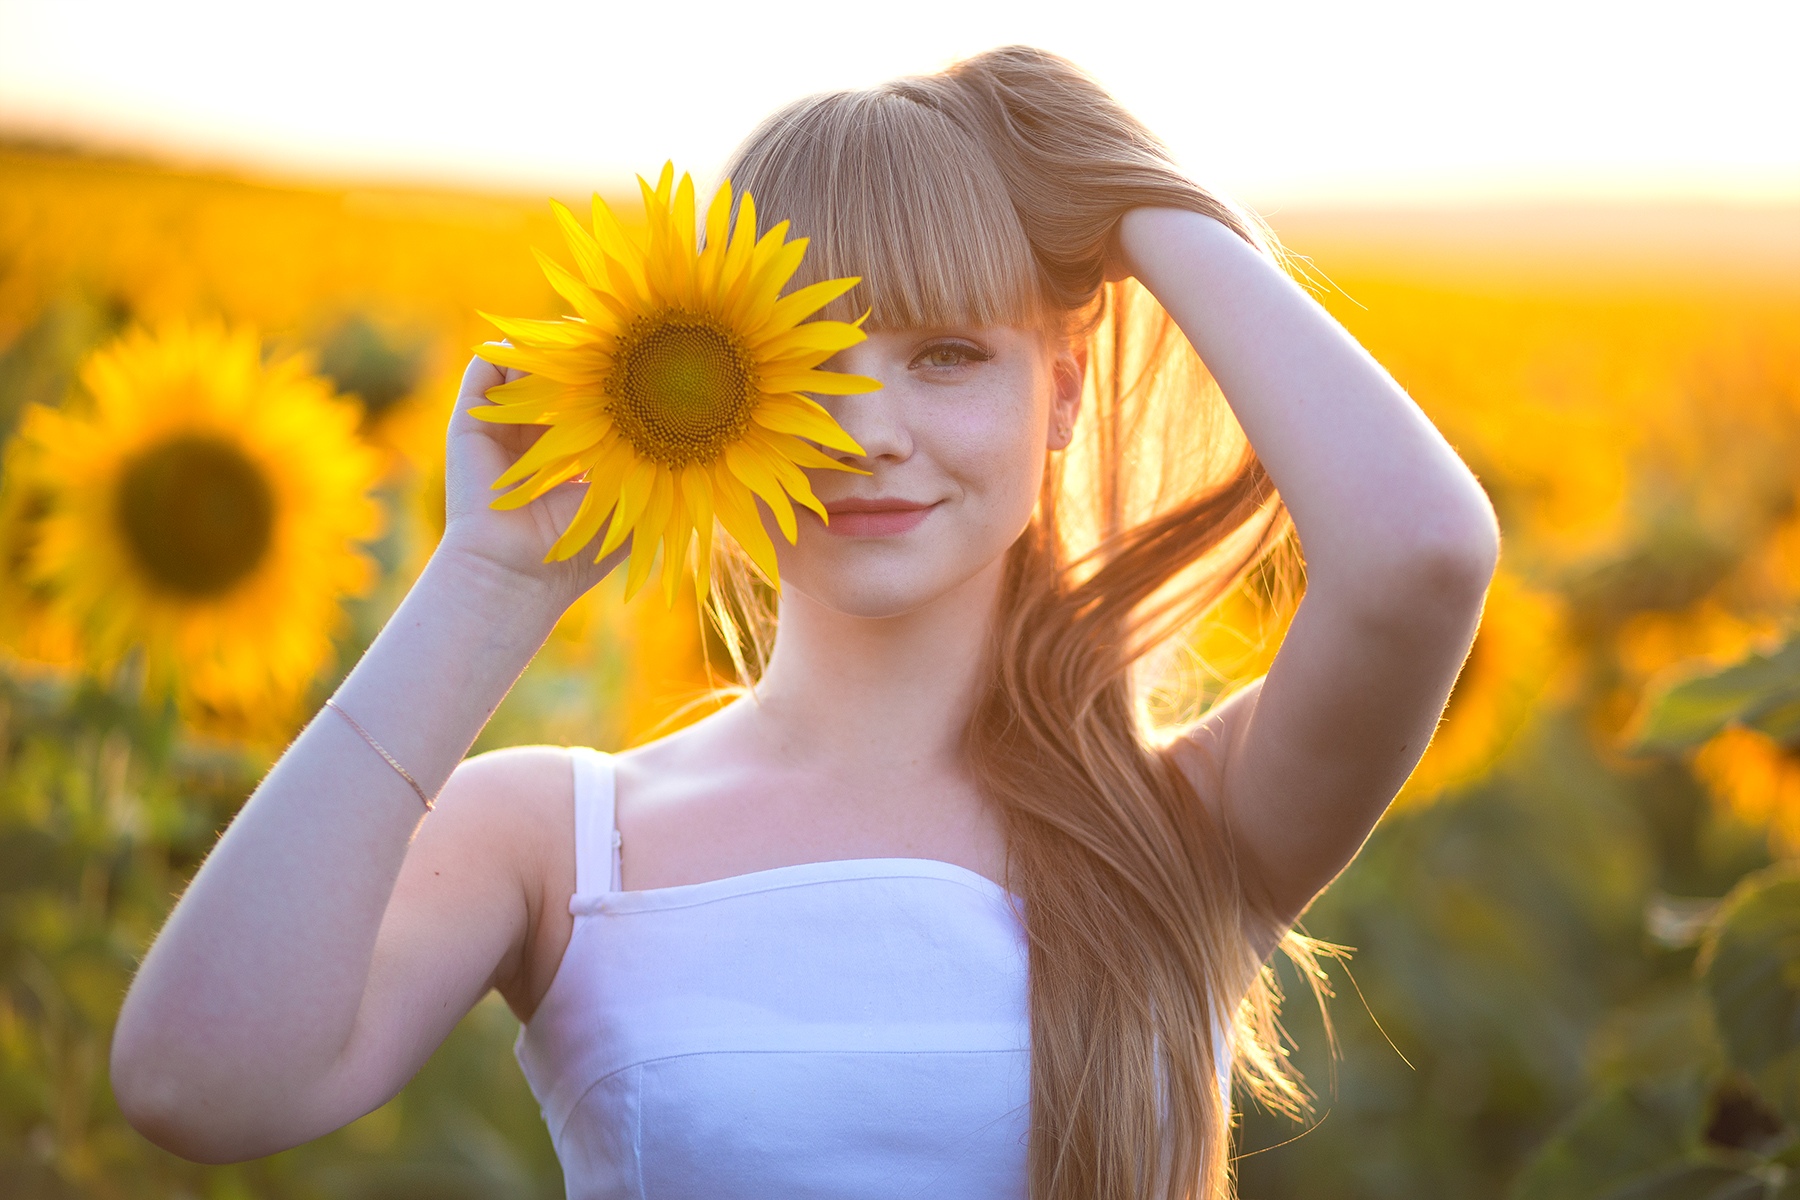 Women Model Blonde Long Hair Looking At Viewer Red Lipstick Hand On Head Sunflowers Depth Of Field P 1800x1200